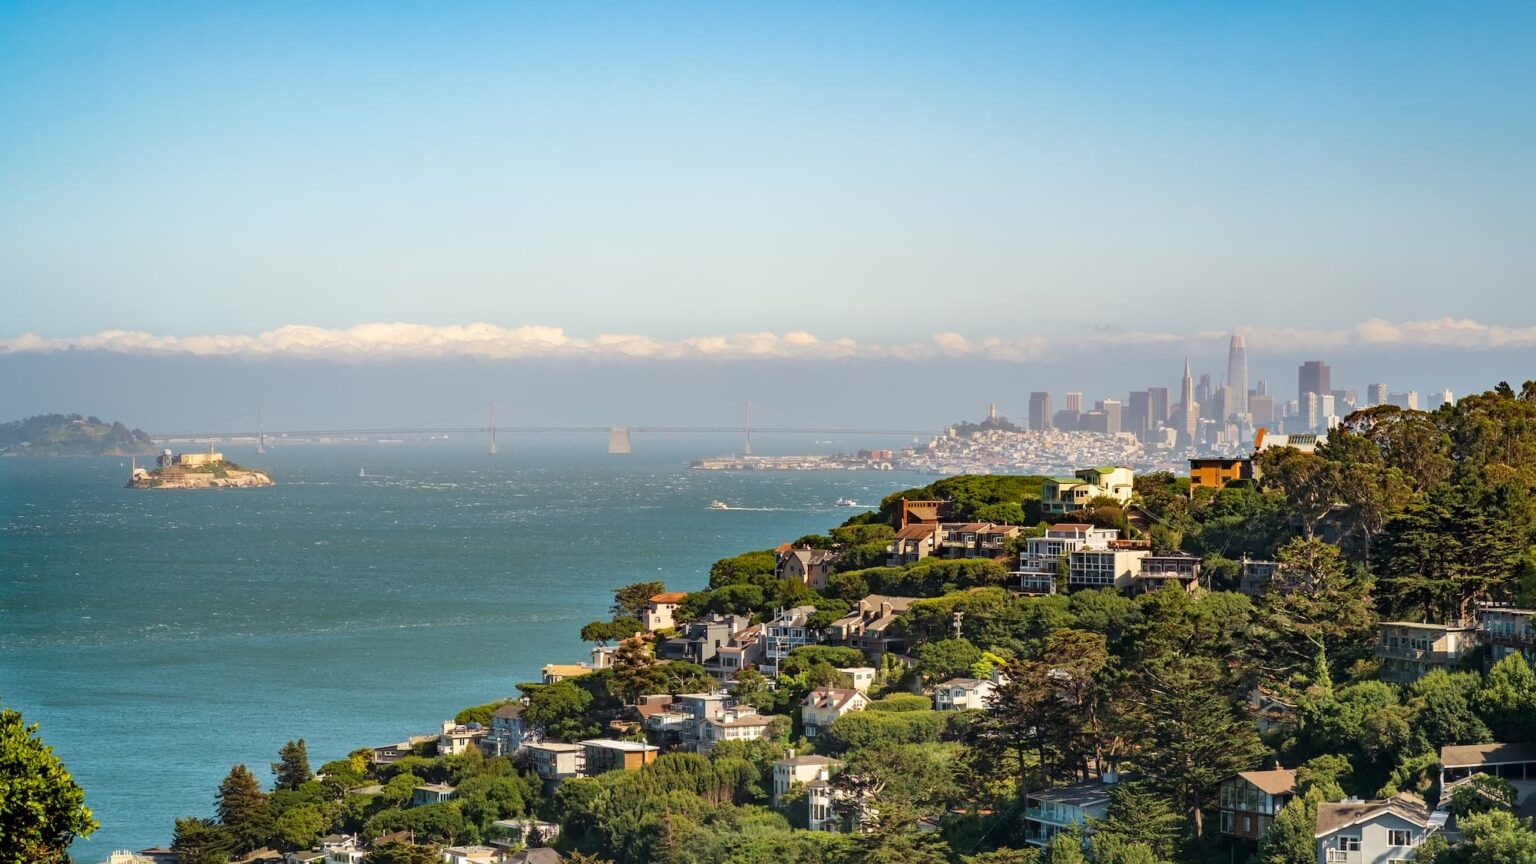 Sausalito-hillside-with-financial-district-of-San-Francisco-on-the-background-and-alcatraz-island-on-the-left.-San-Francisco-bay-California-USA.jpg